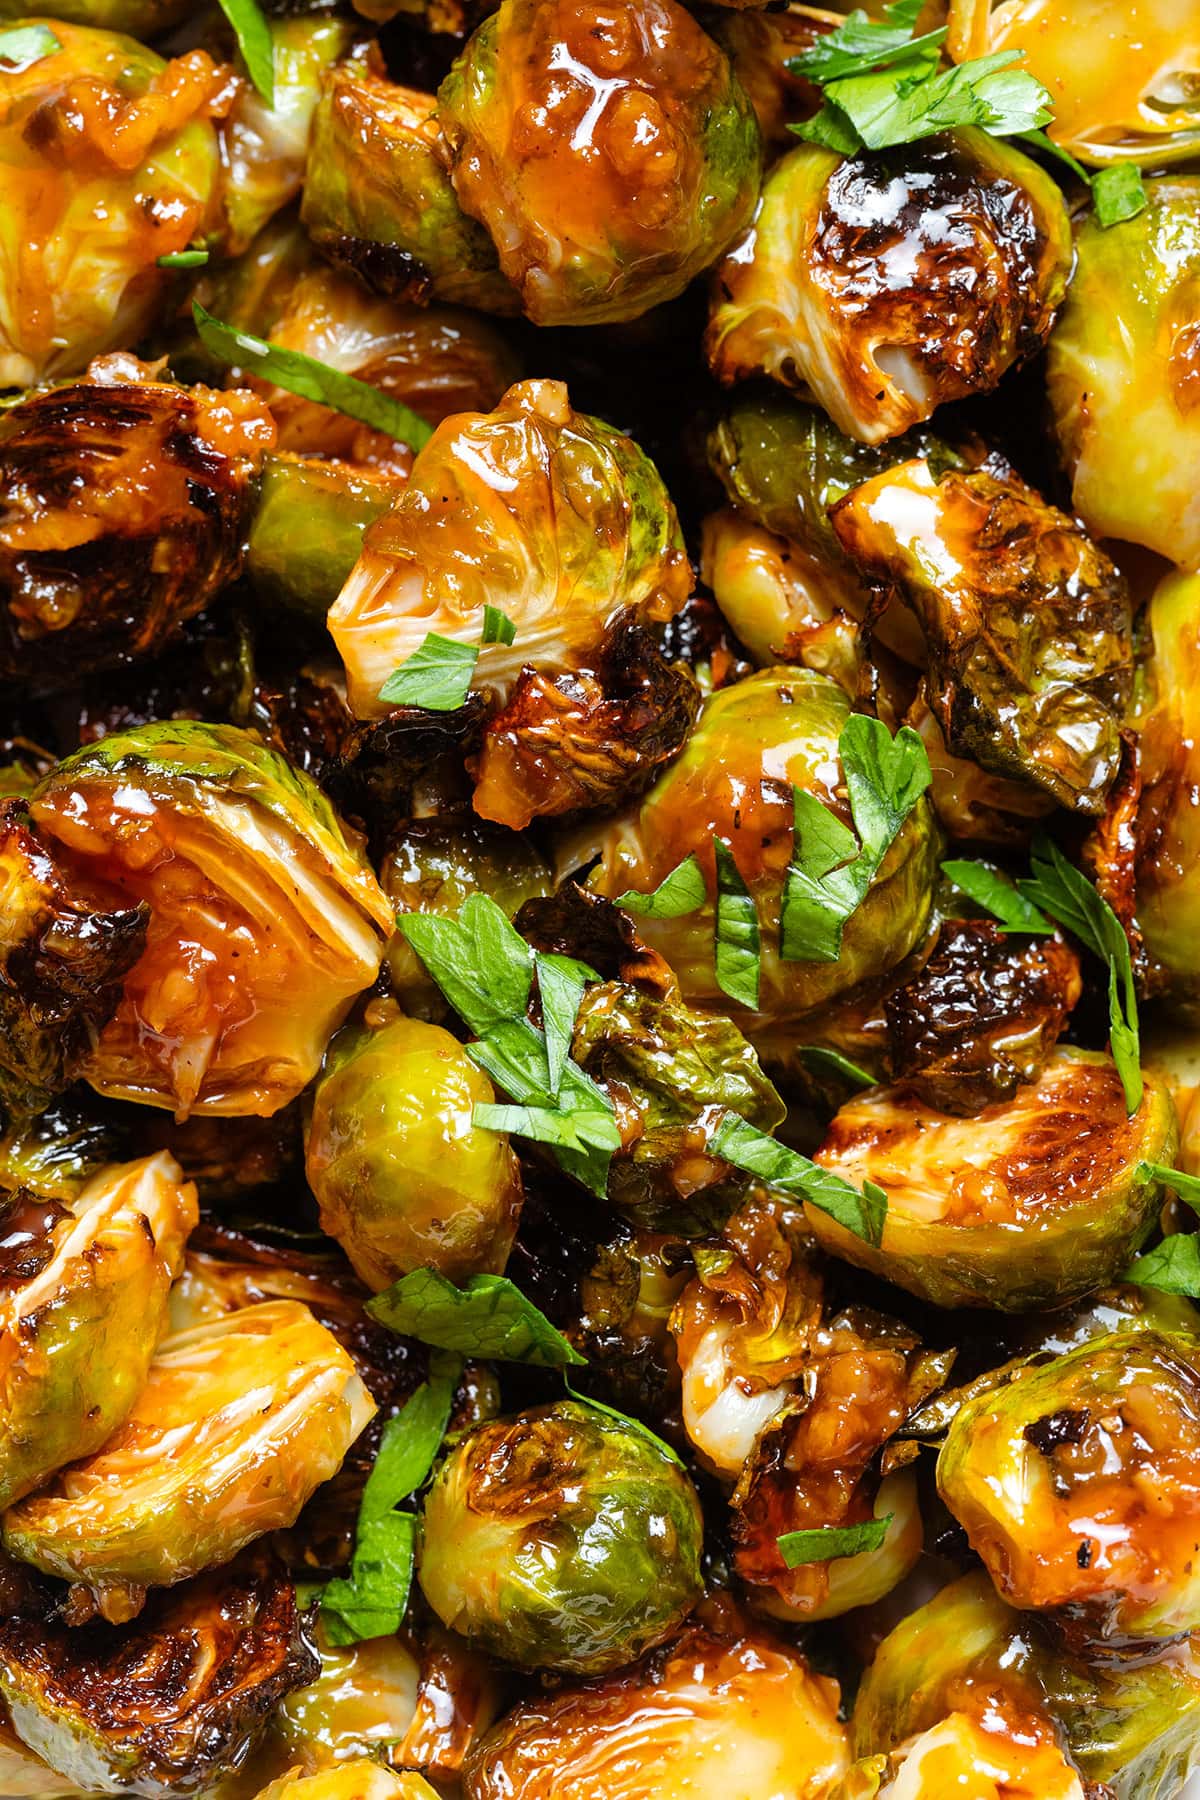 Charred saucy brussels sprouts topped with chopped fresh parsley.